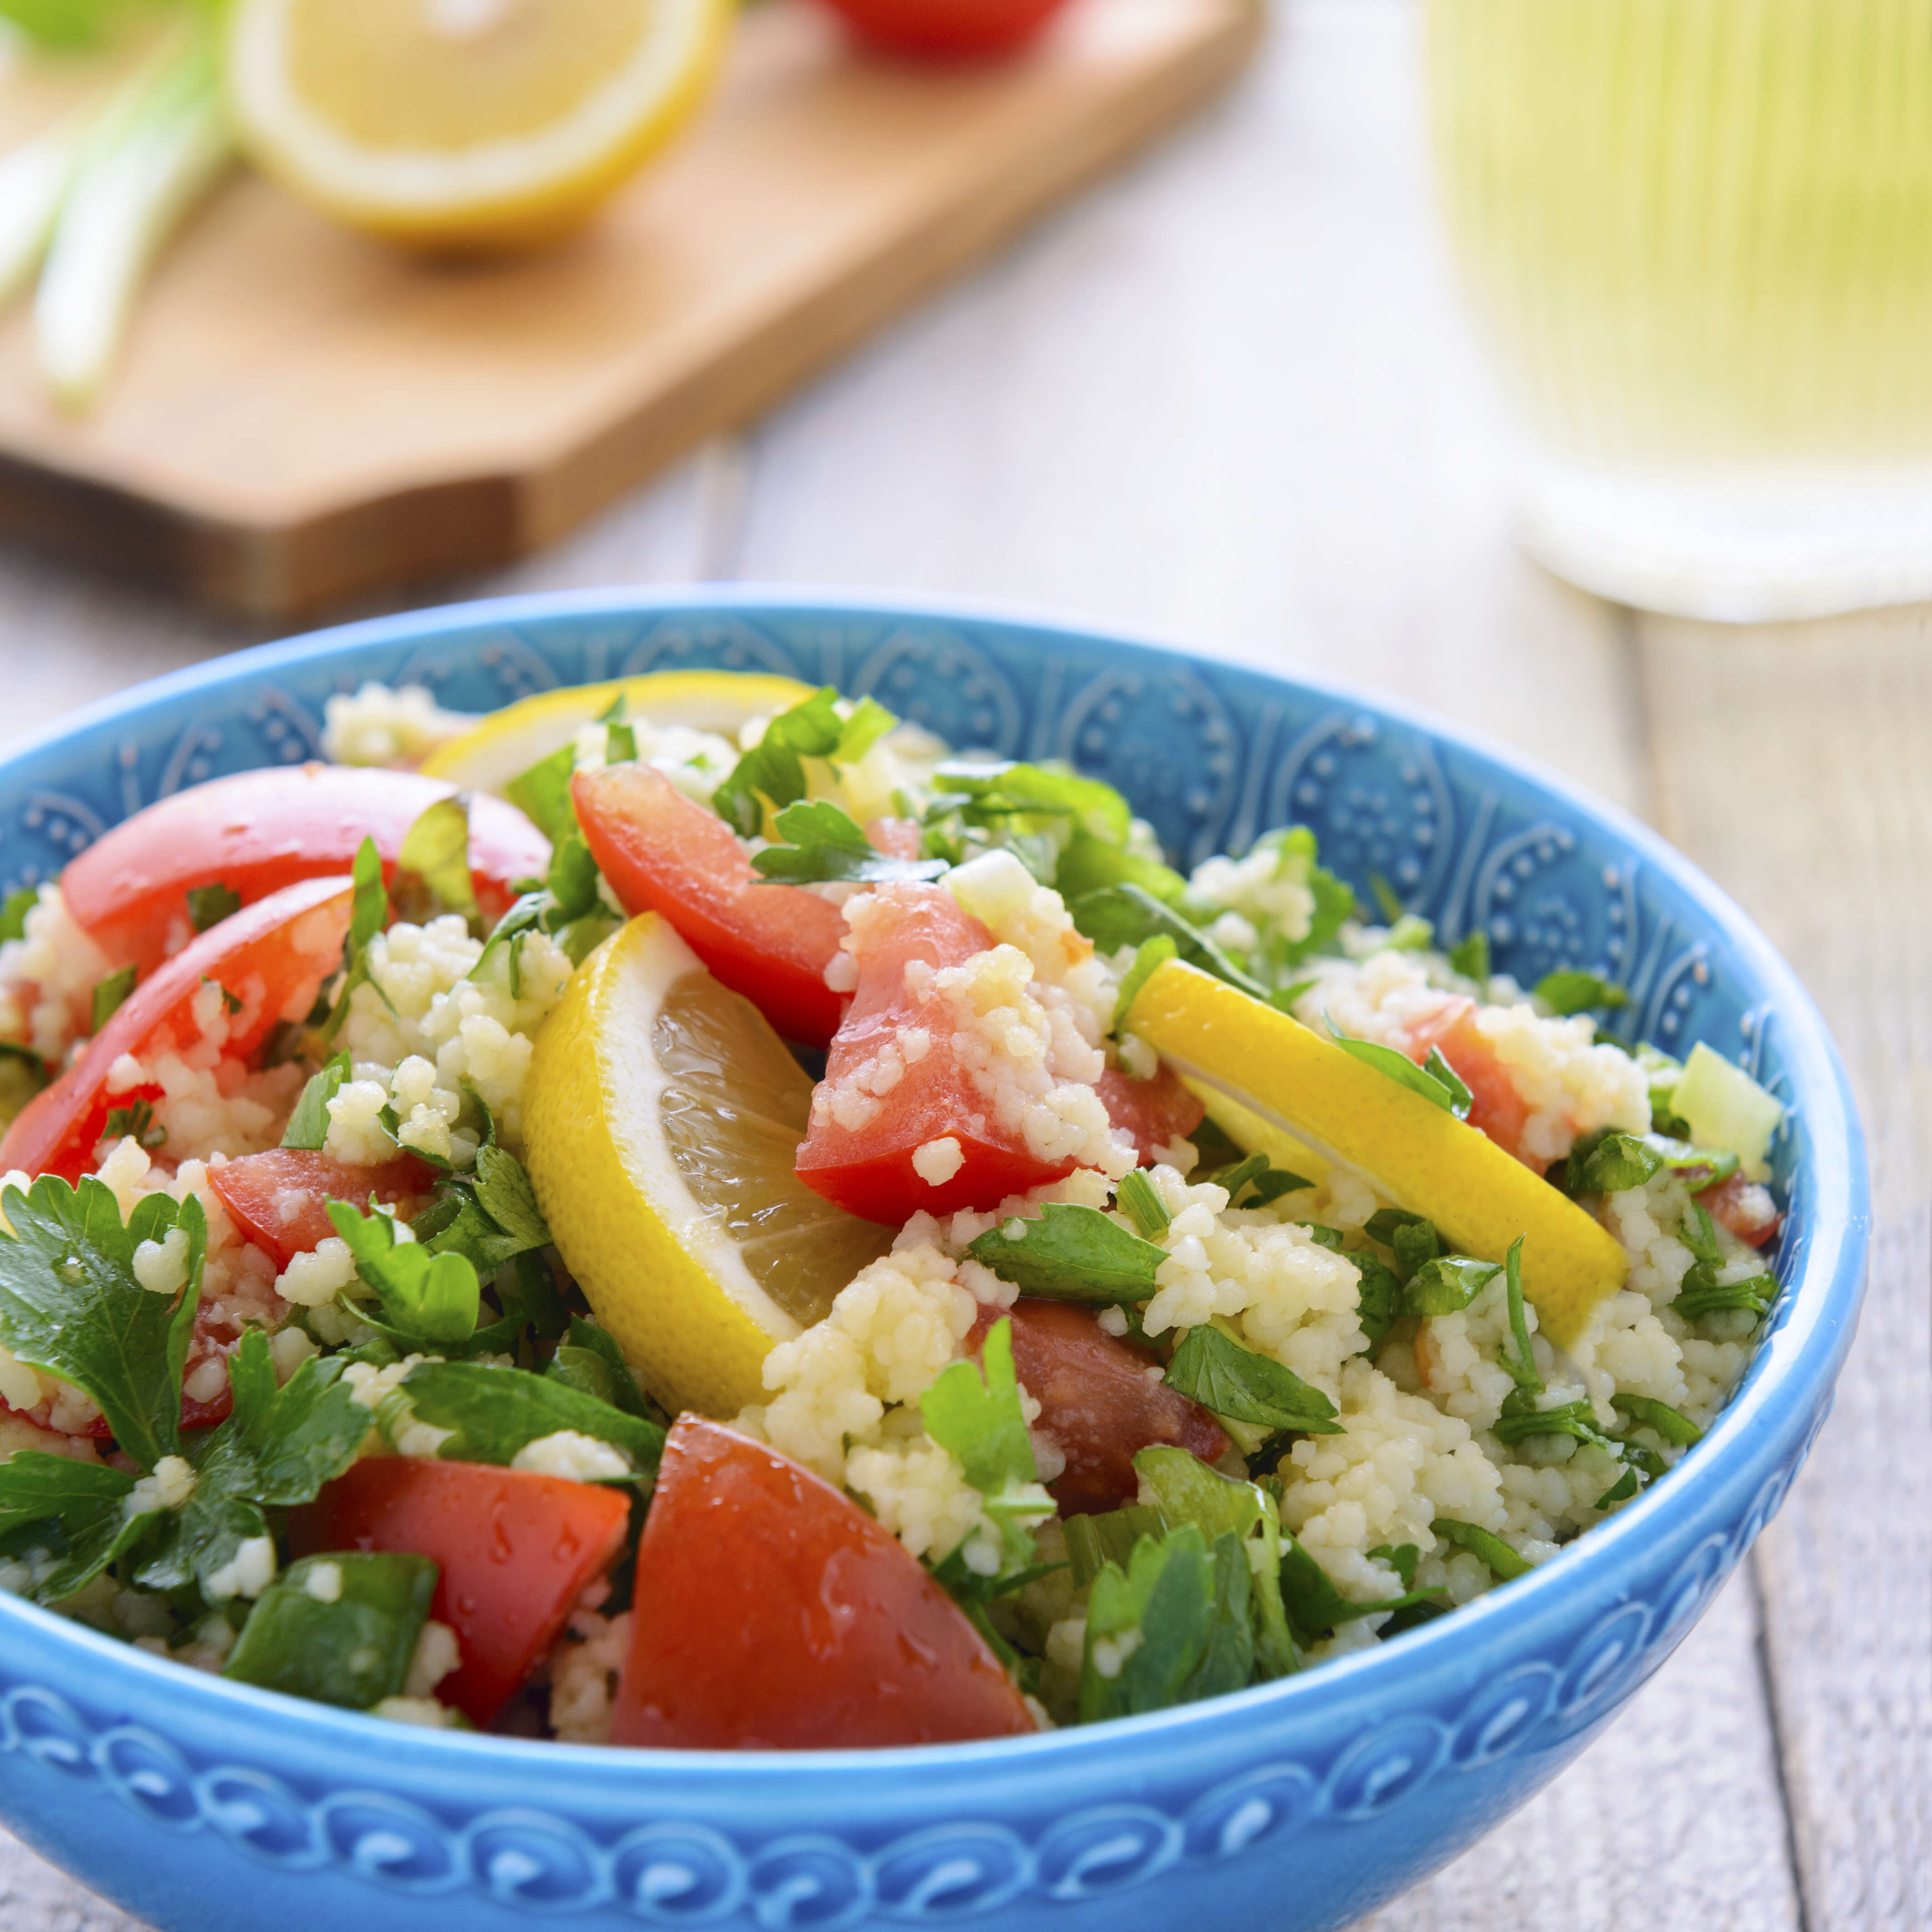 Couscous Vs Israeli Couscous: What’s The Difference?